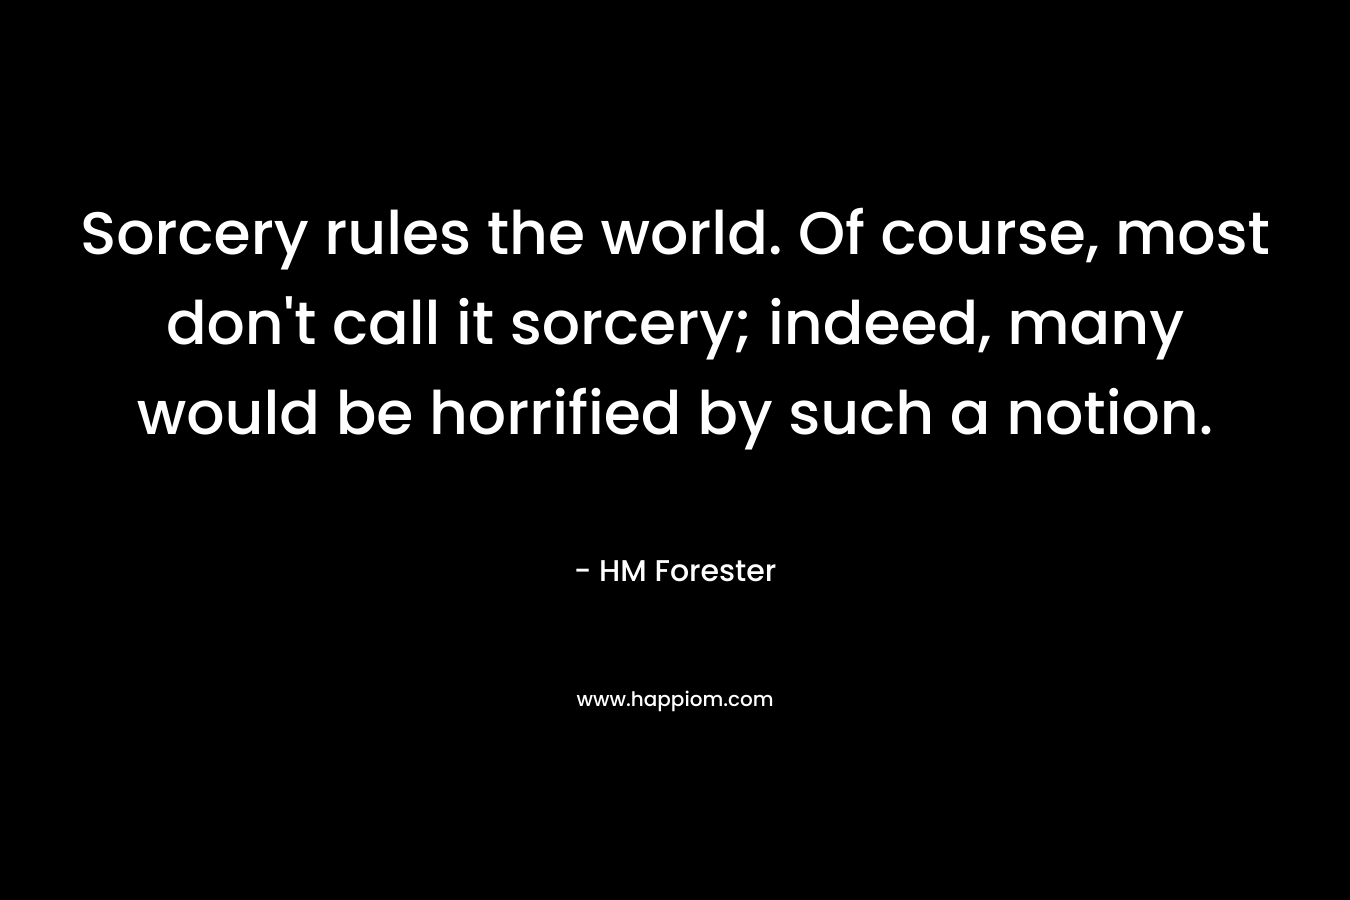 Sorcery rules the world. Of course, most don’t call it sorcery; indeed, many would be horrified by such a notion. – HM Forester